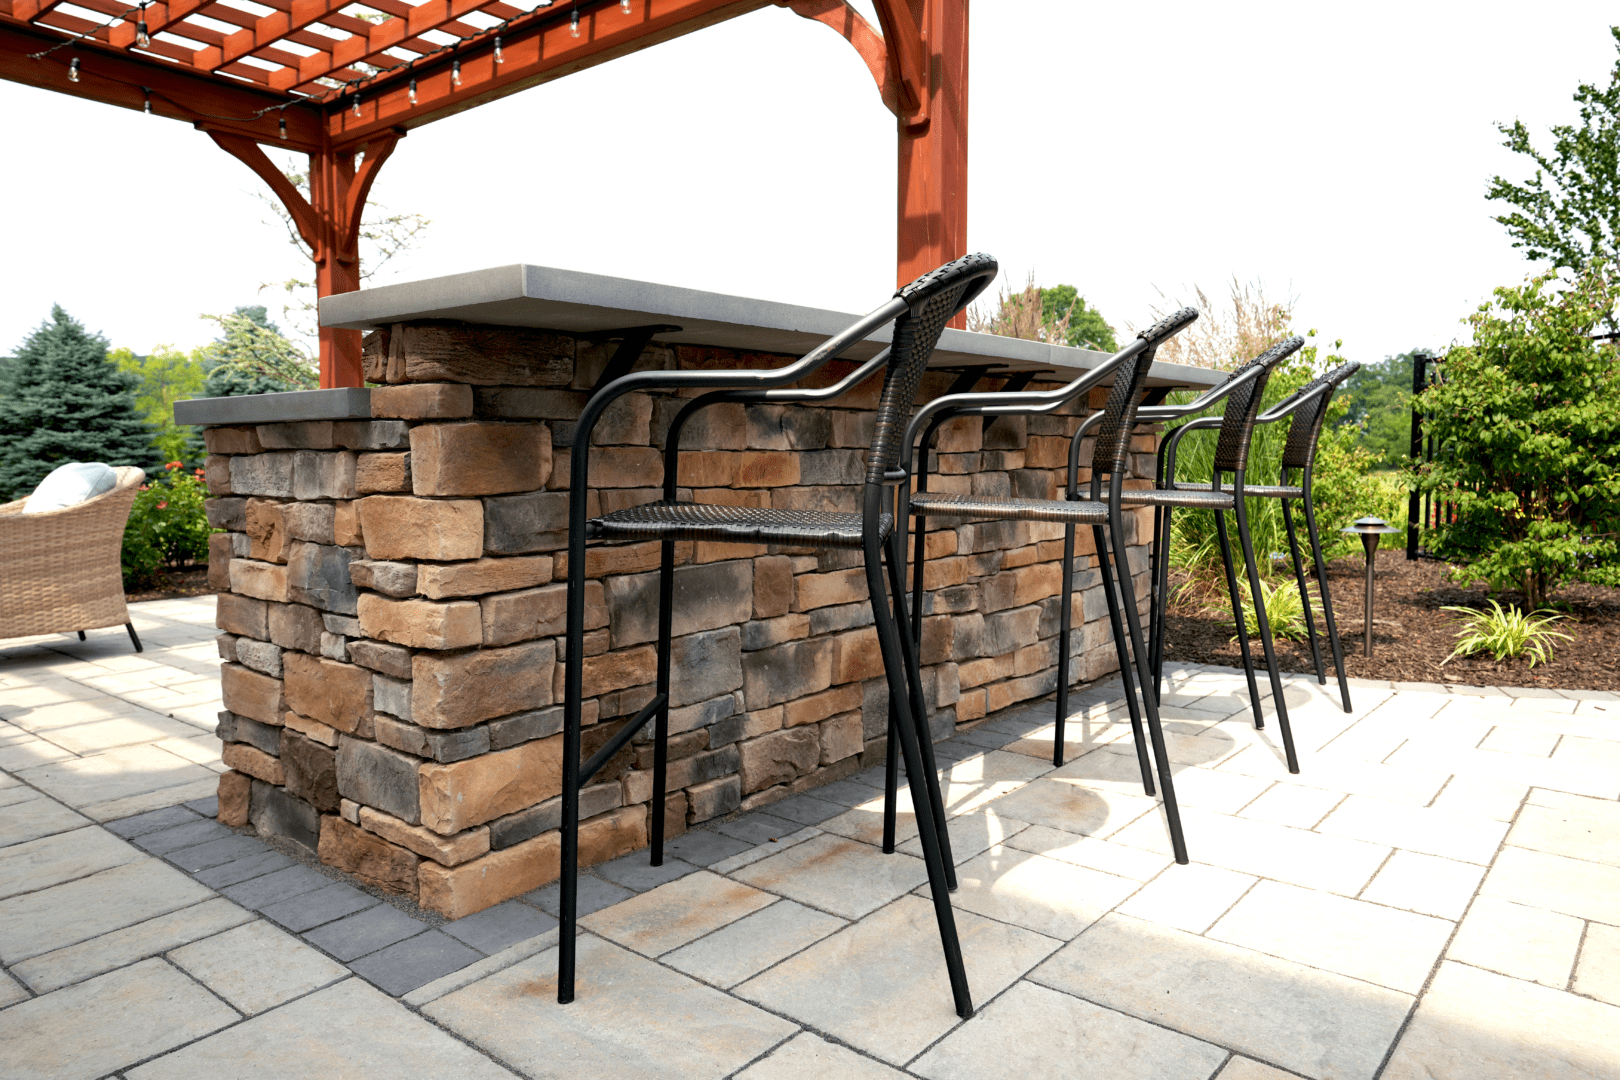 A custom stone patio with a bar and stools for outdoor entertainment.